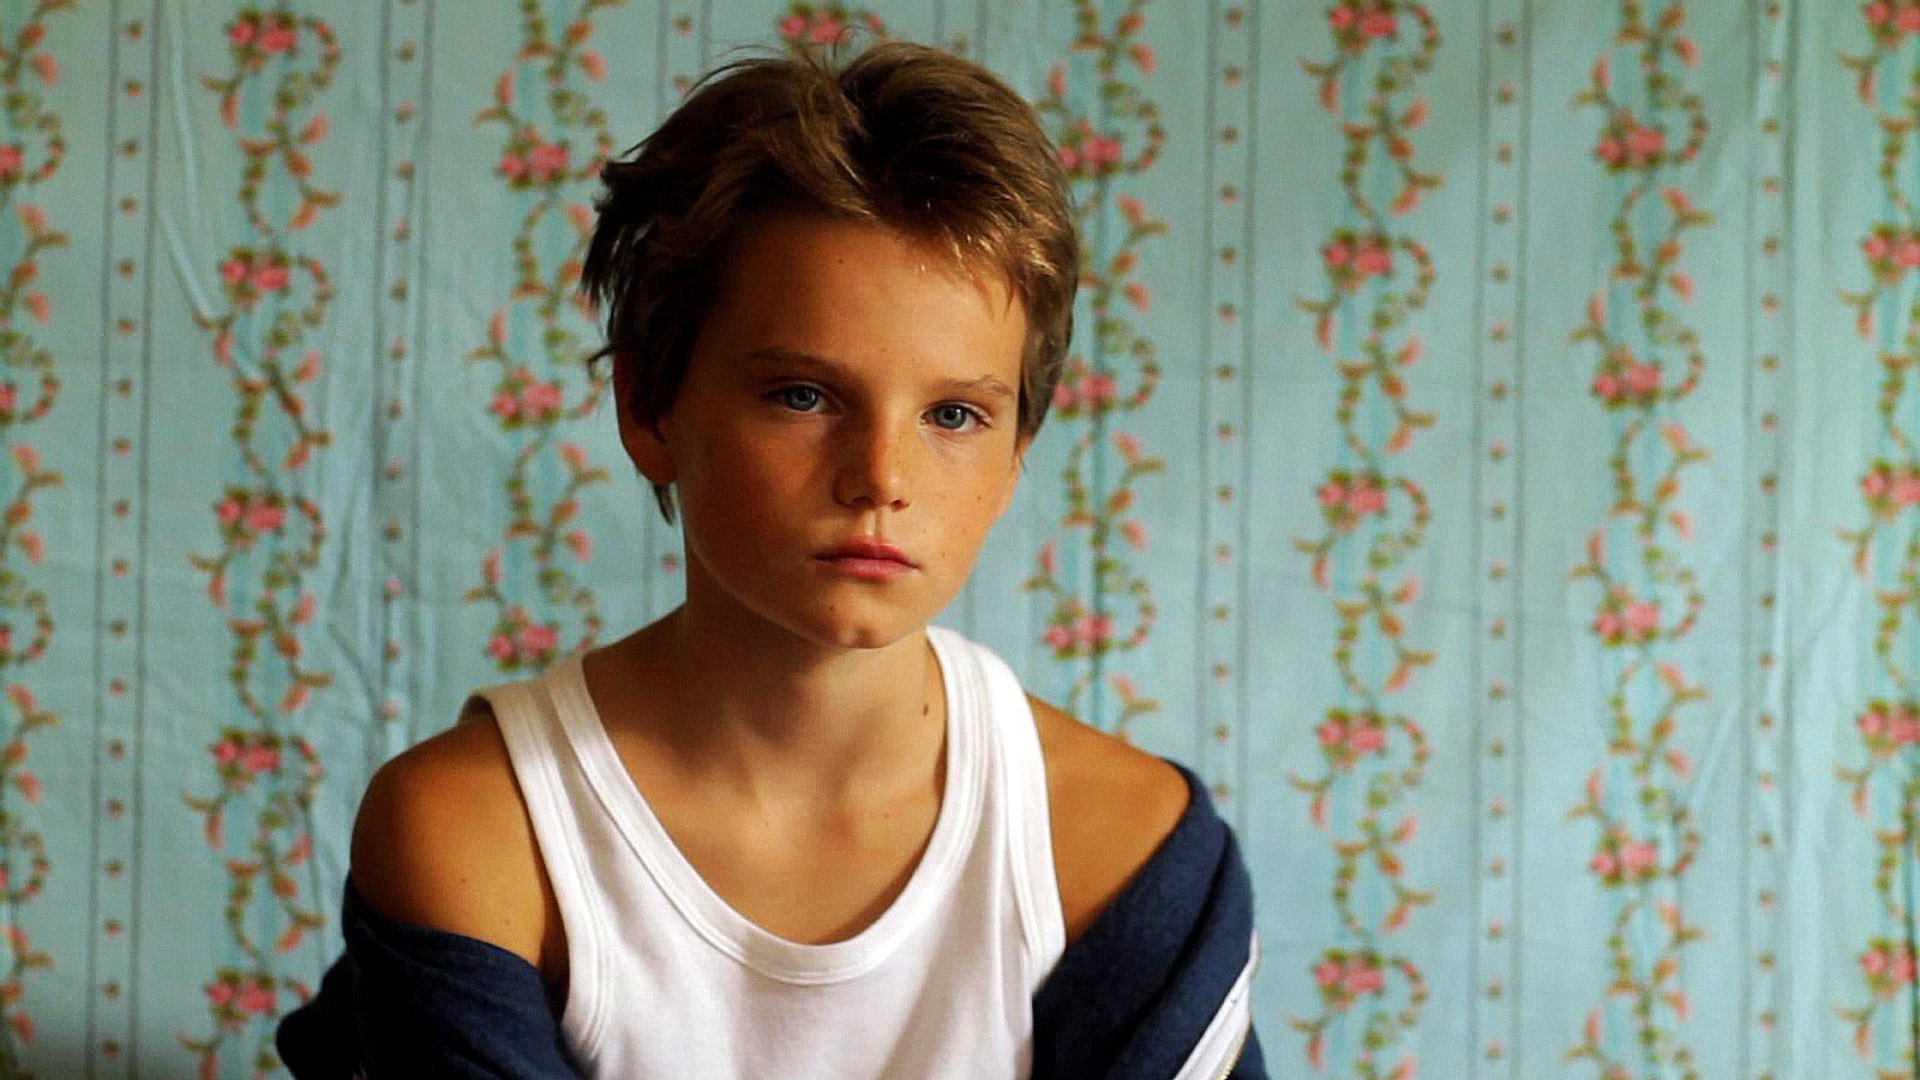 Image from the movie Tomboy (2011) .